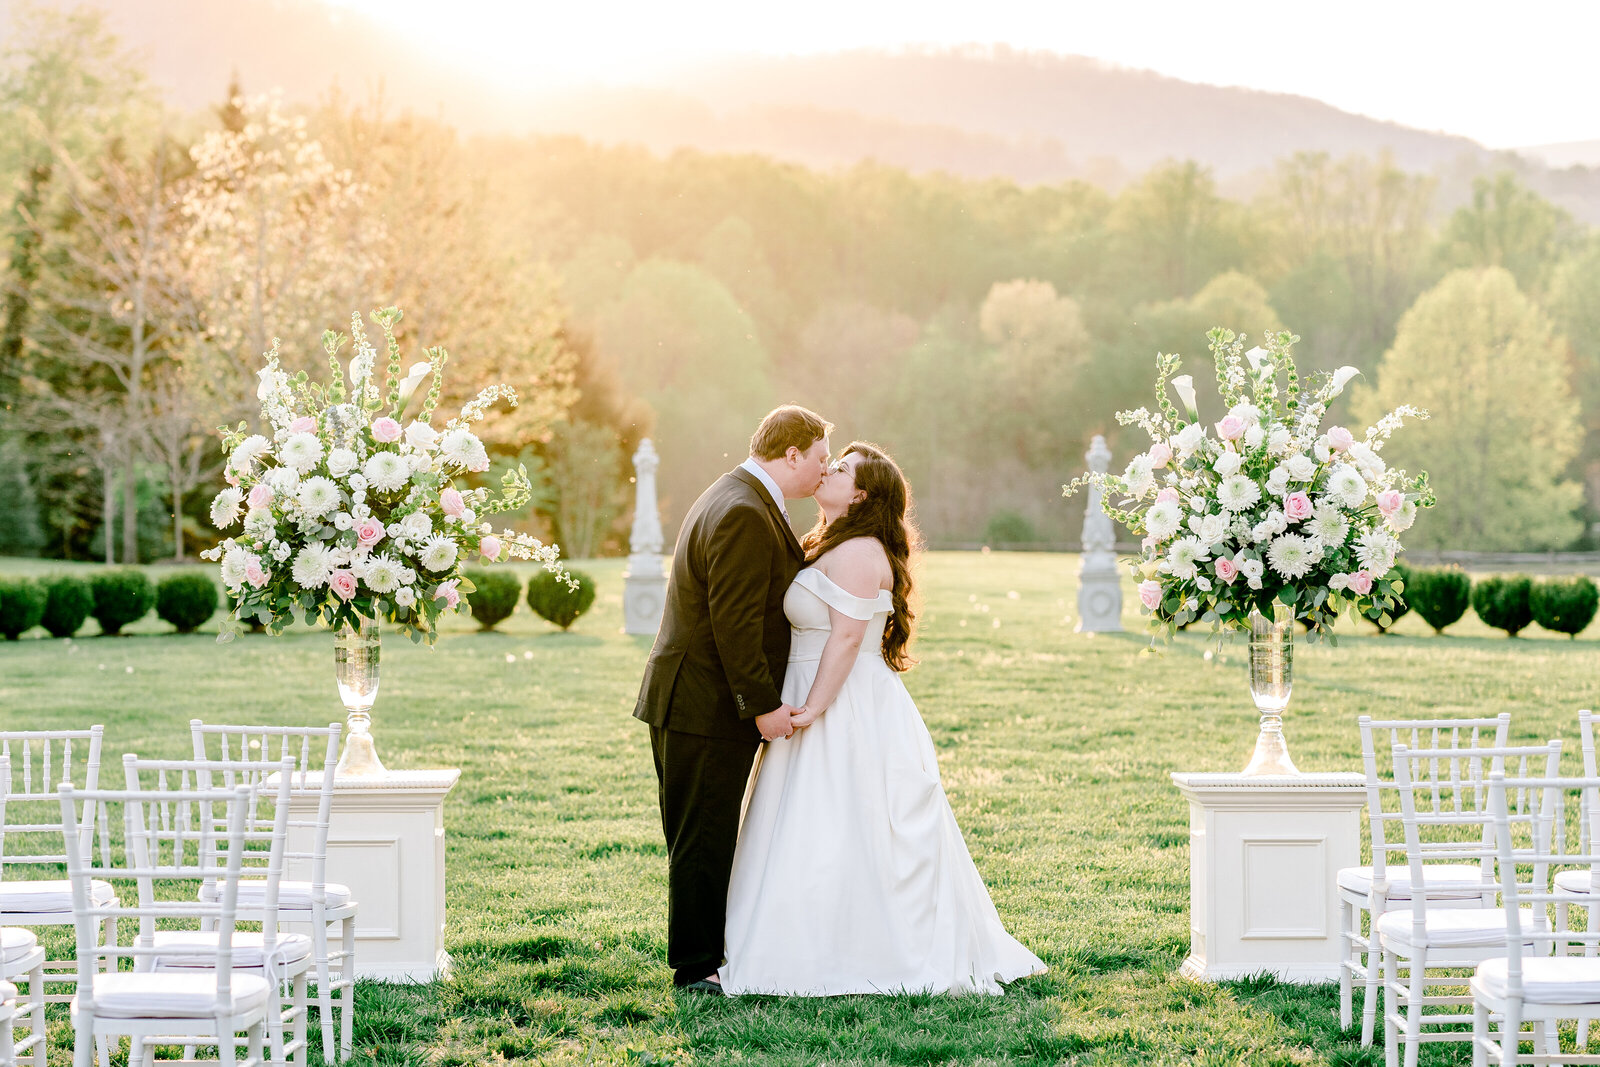 A golden hour portrait of a bride and groom during their wedding at The Inn at Little Washington in Virginia